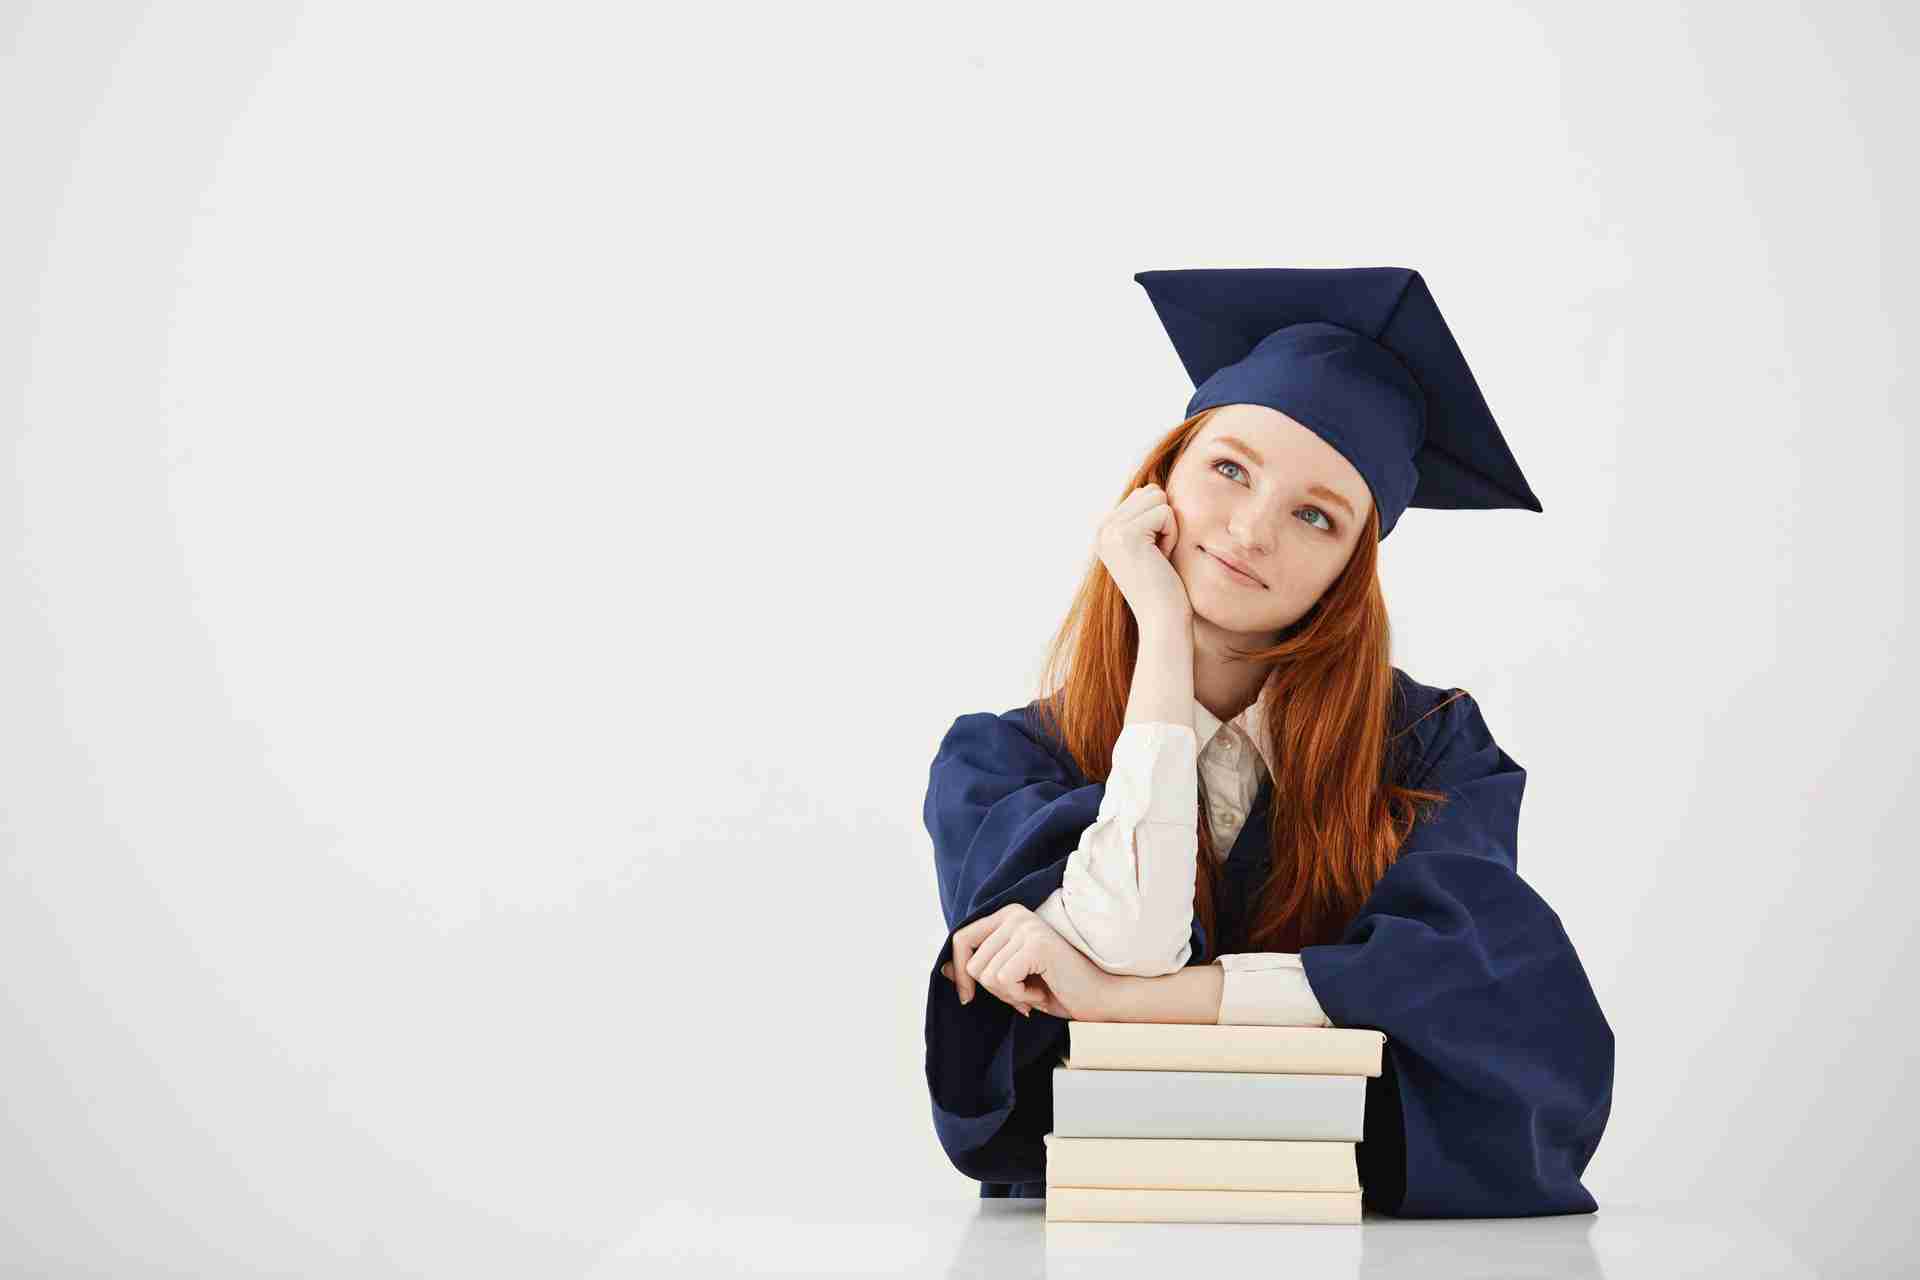 dreamy-graduate-woman-smiling-thinking-sitting-with-books.jpg